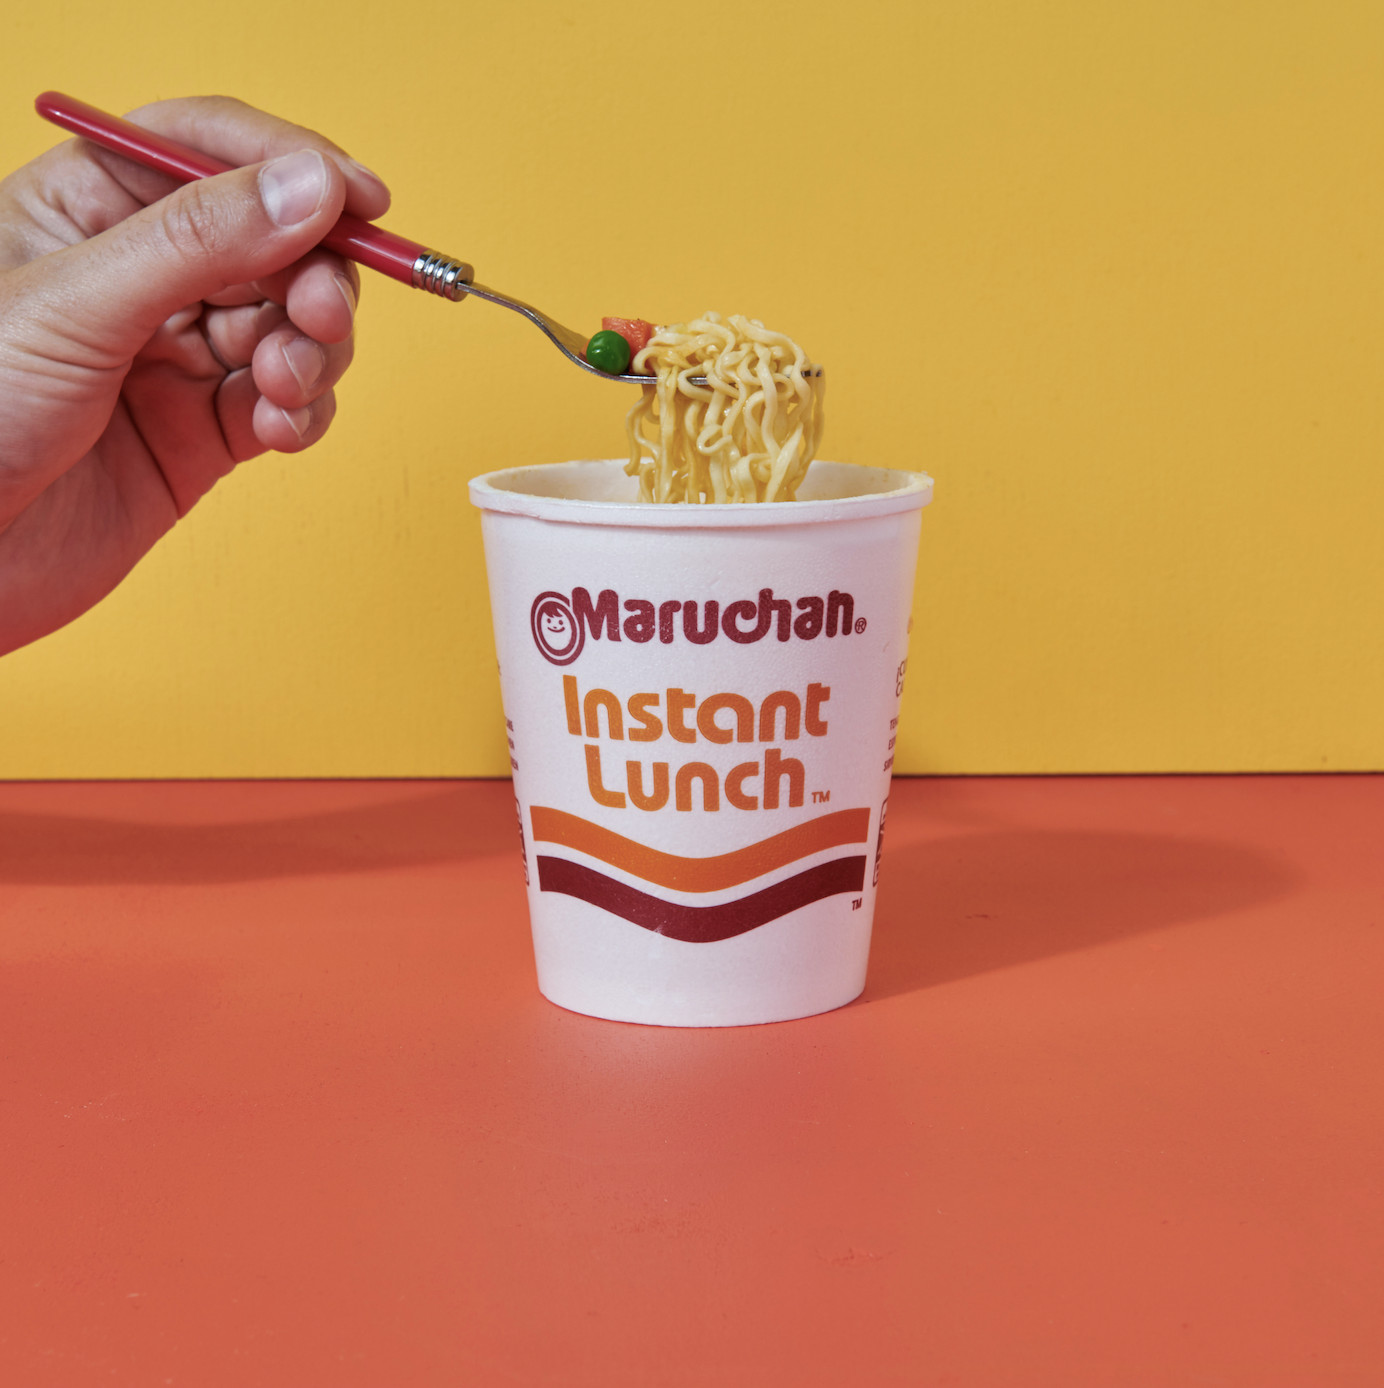 Maruchan Cup Noodles
 Our Instant Lunch cup is the ultimate form of